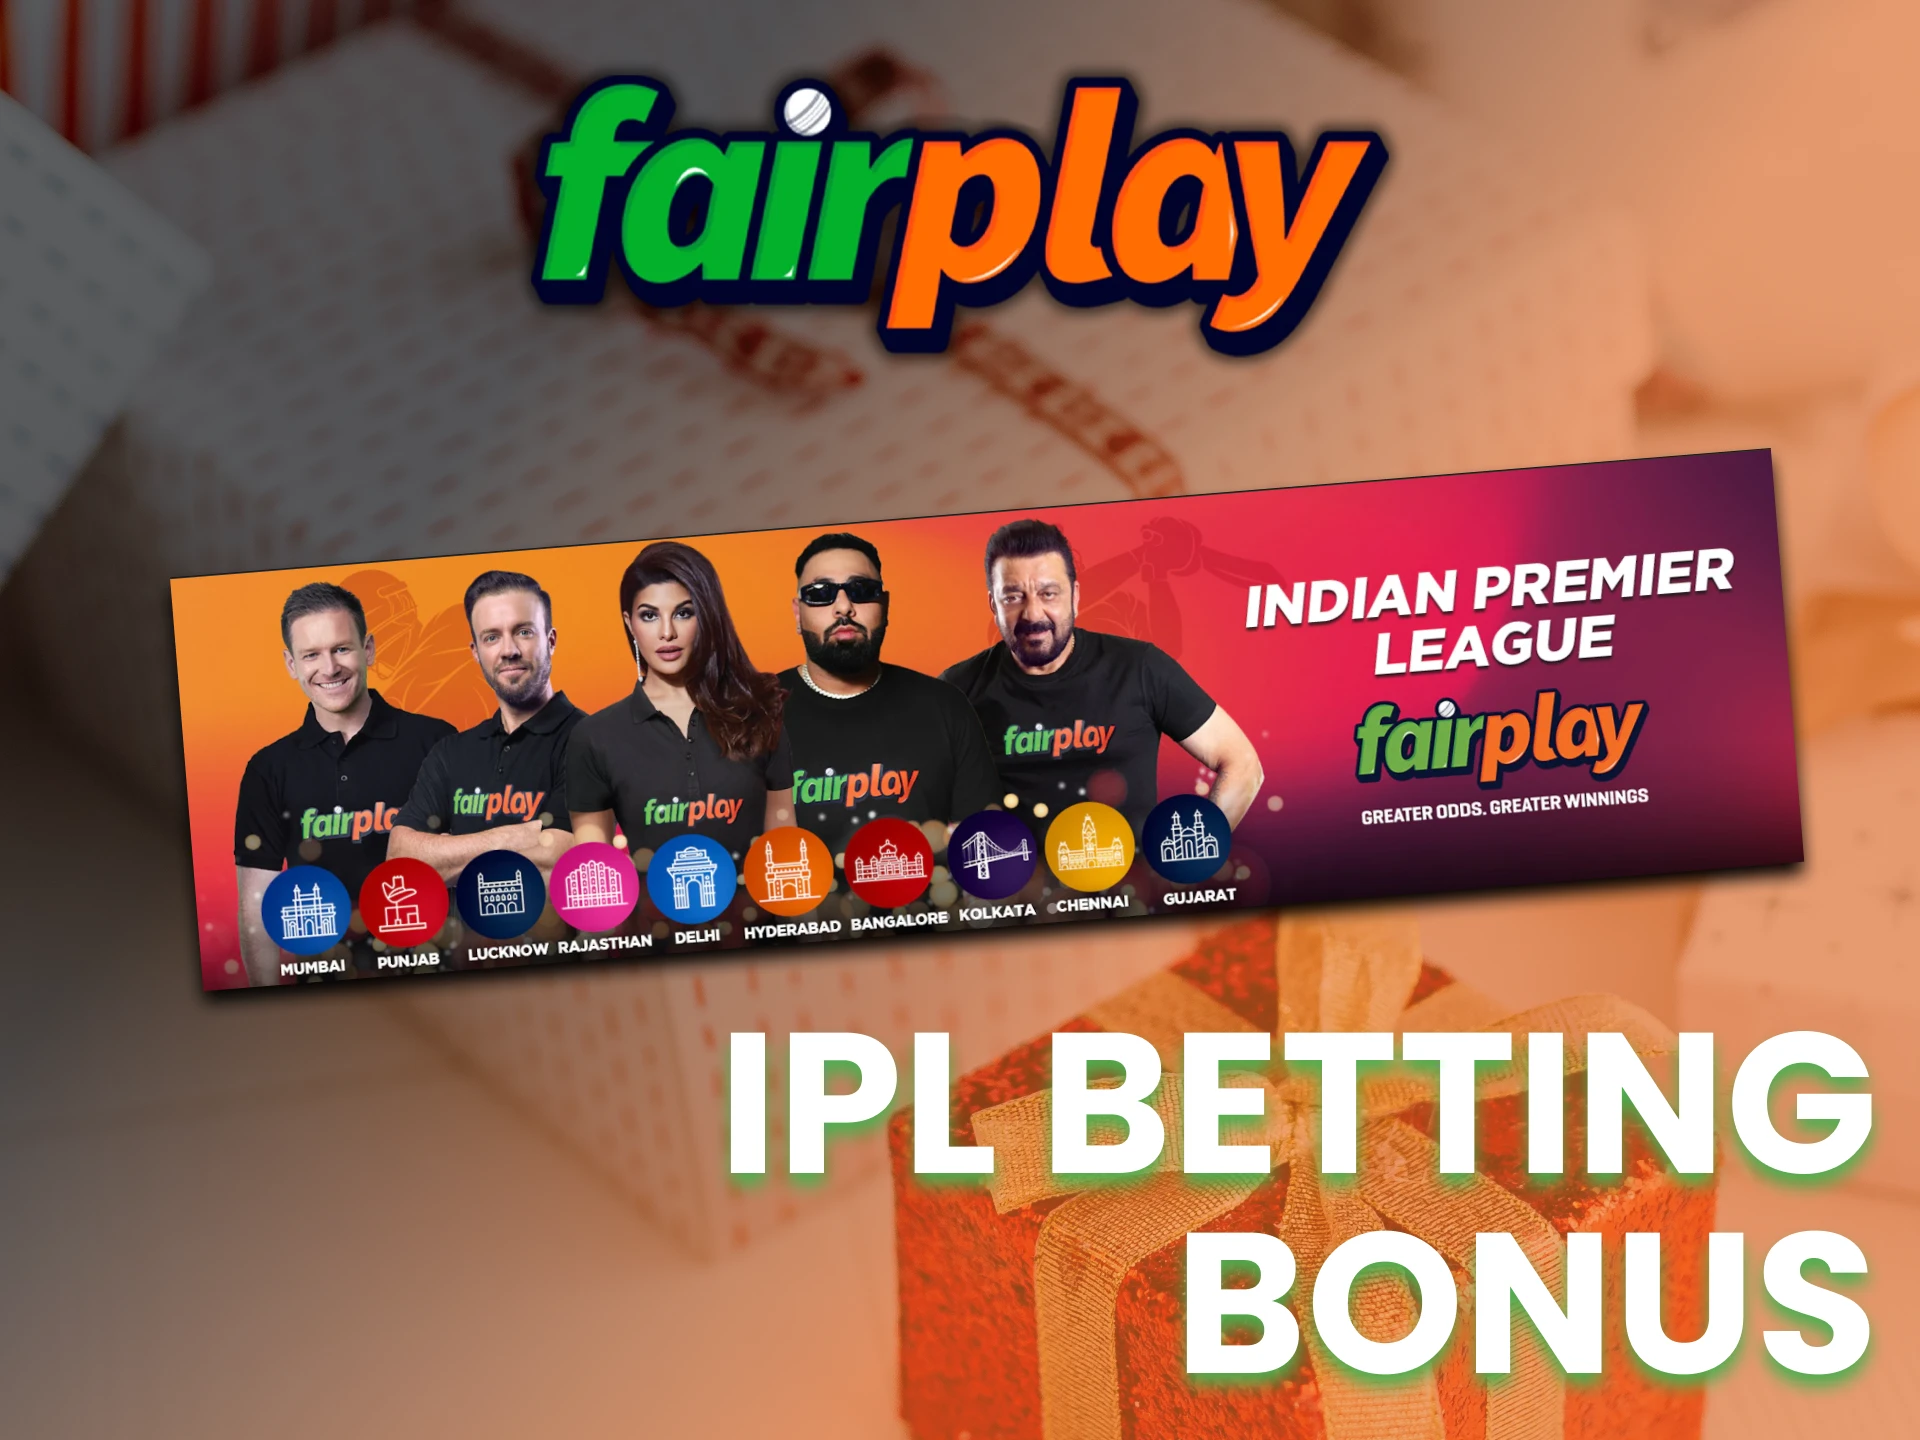 Bet on IPL games at Fairplay and win money.